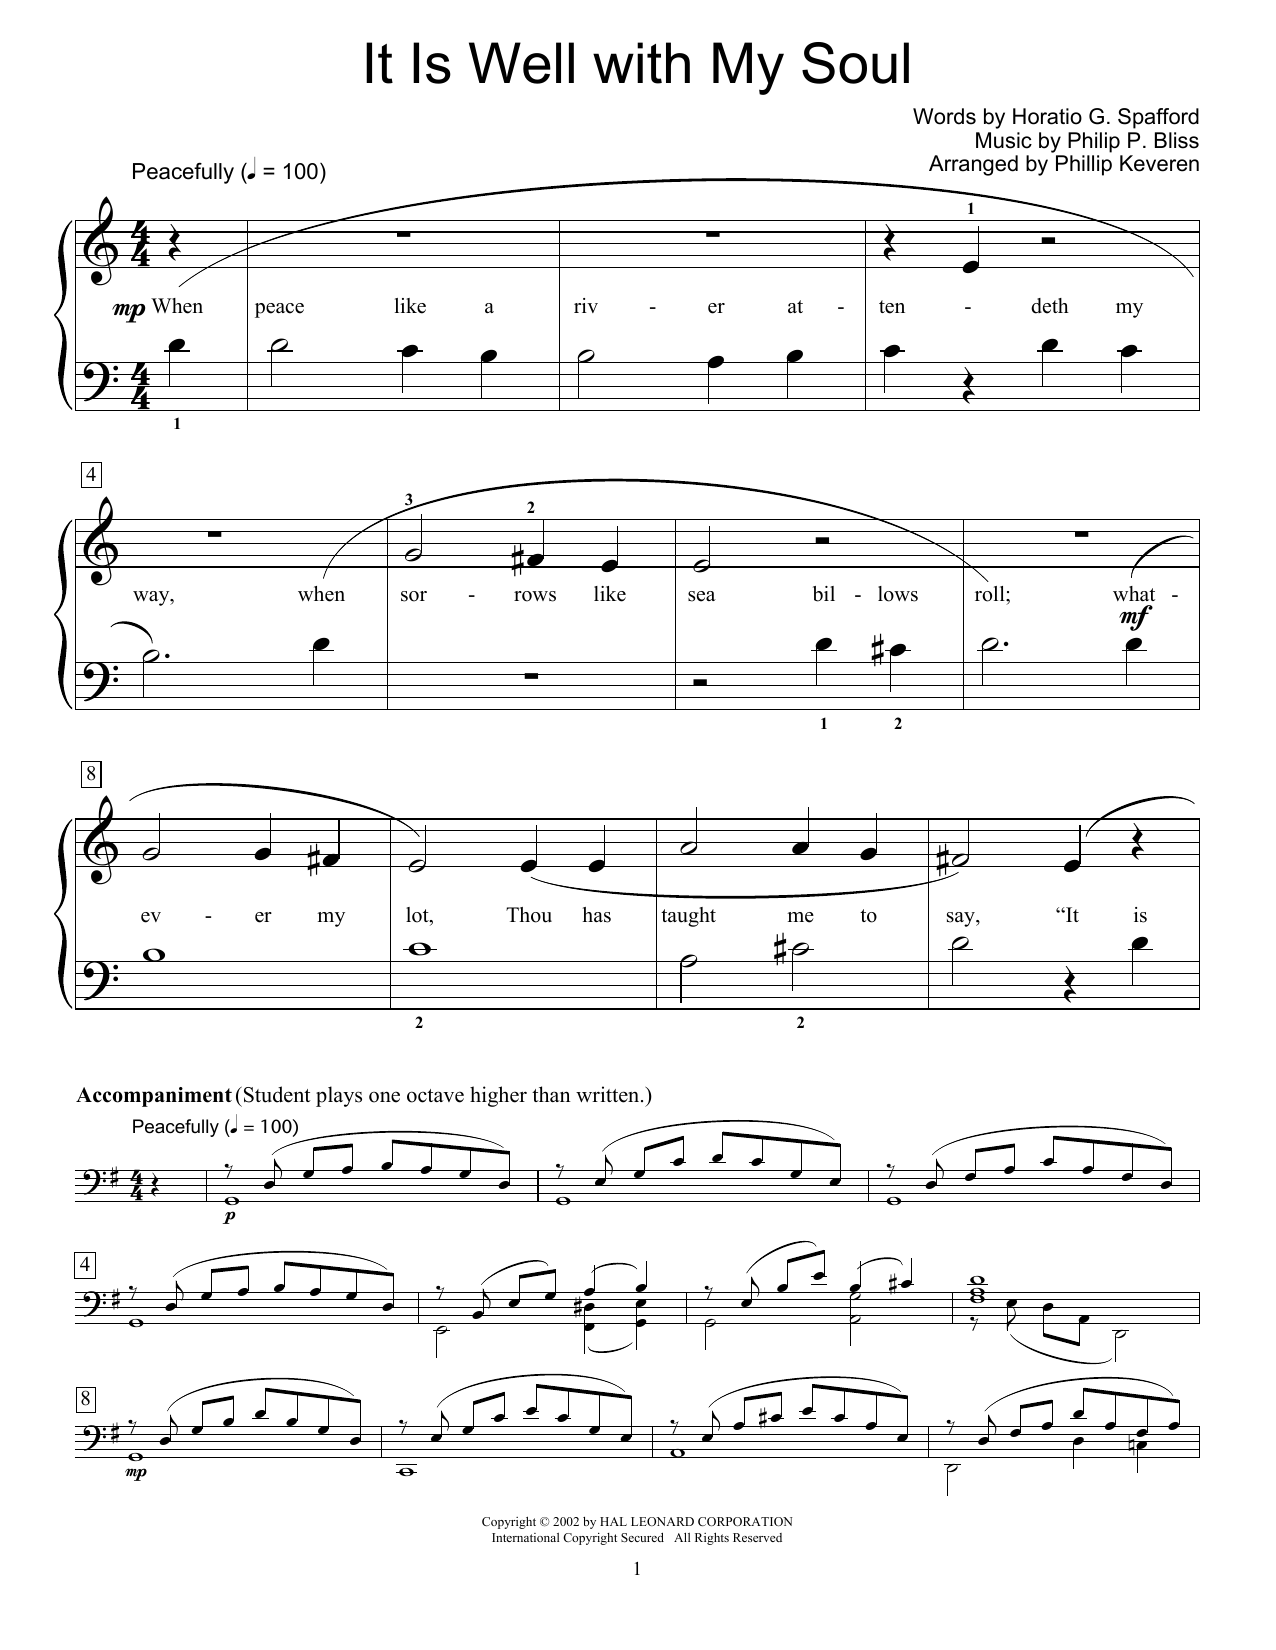 Download Horatio G. Spafford It Is Well With My Soul Sheet Music